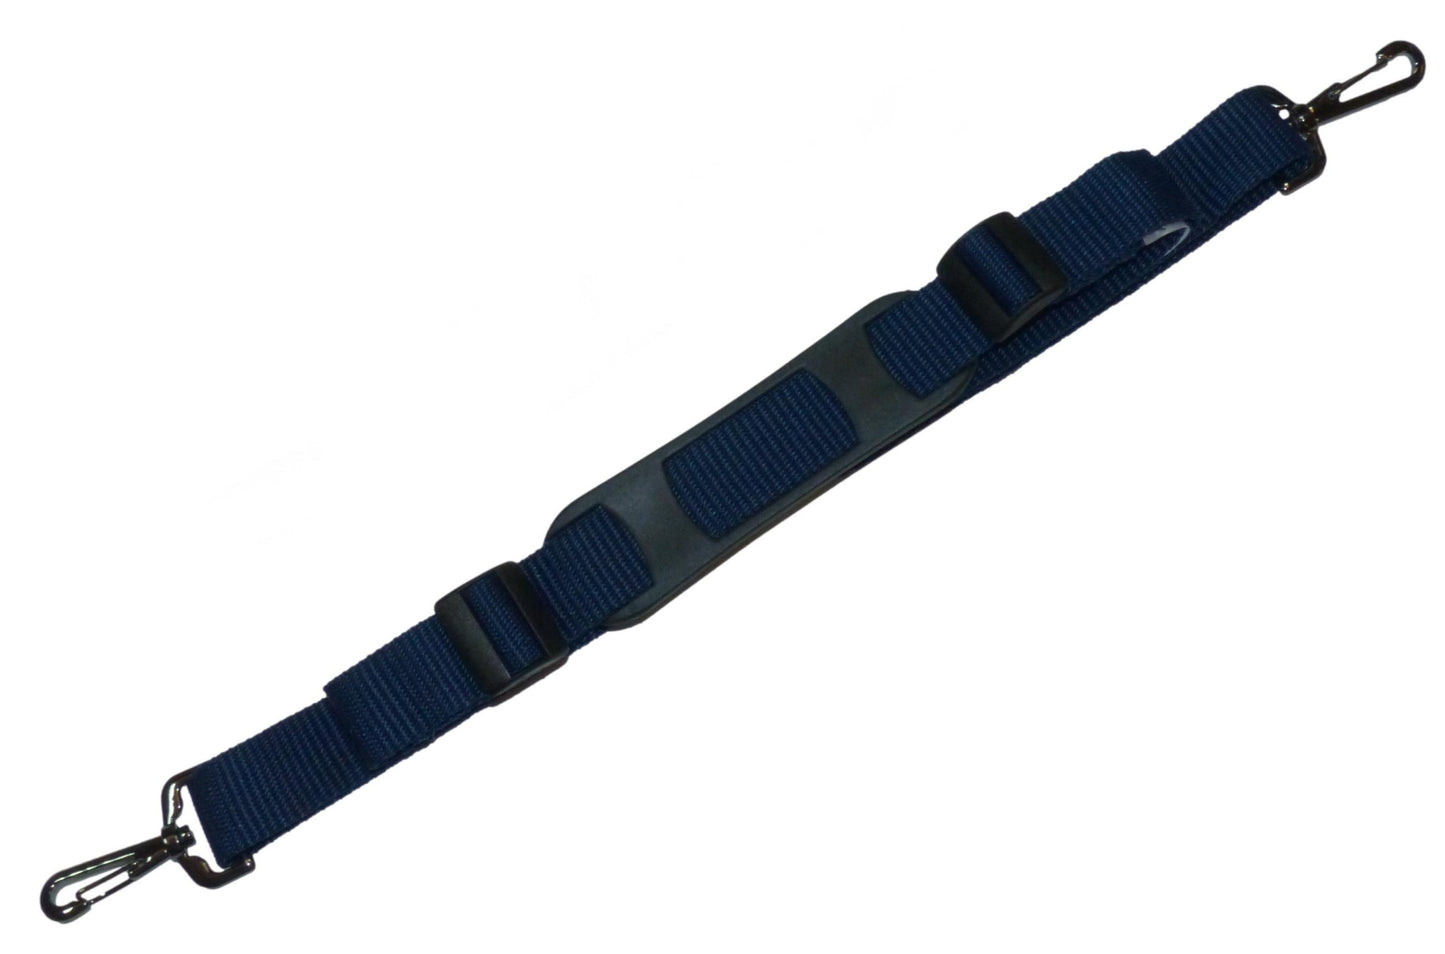 Benristraps 25mm Bag Strap with Metal Buckles and Shoulder Pad, 150cm in navy blue